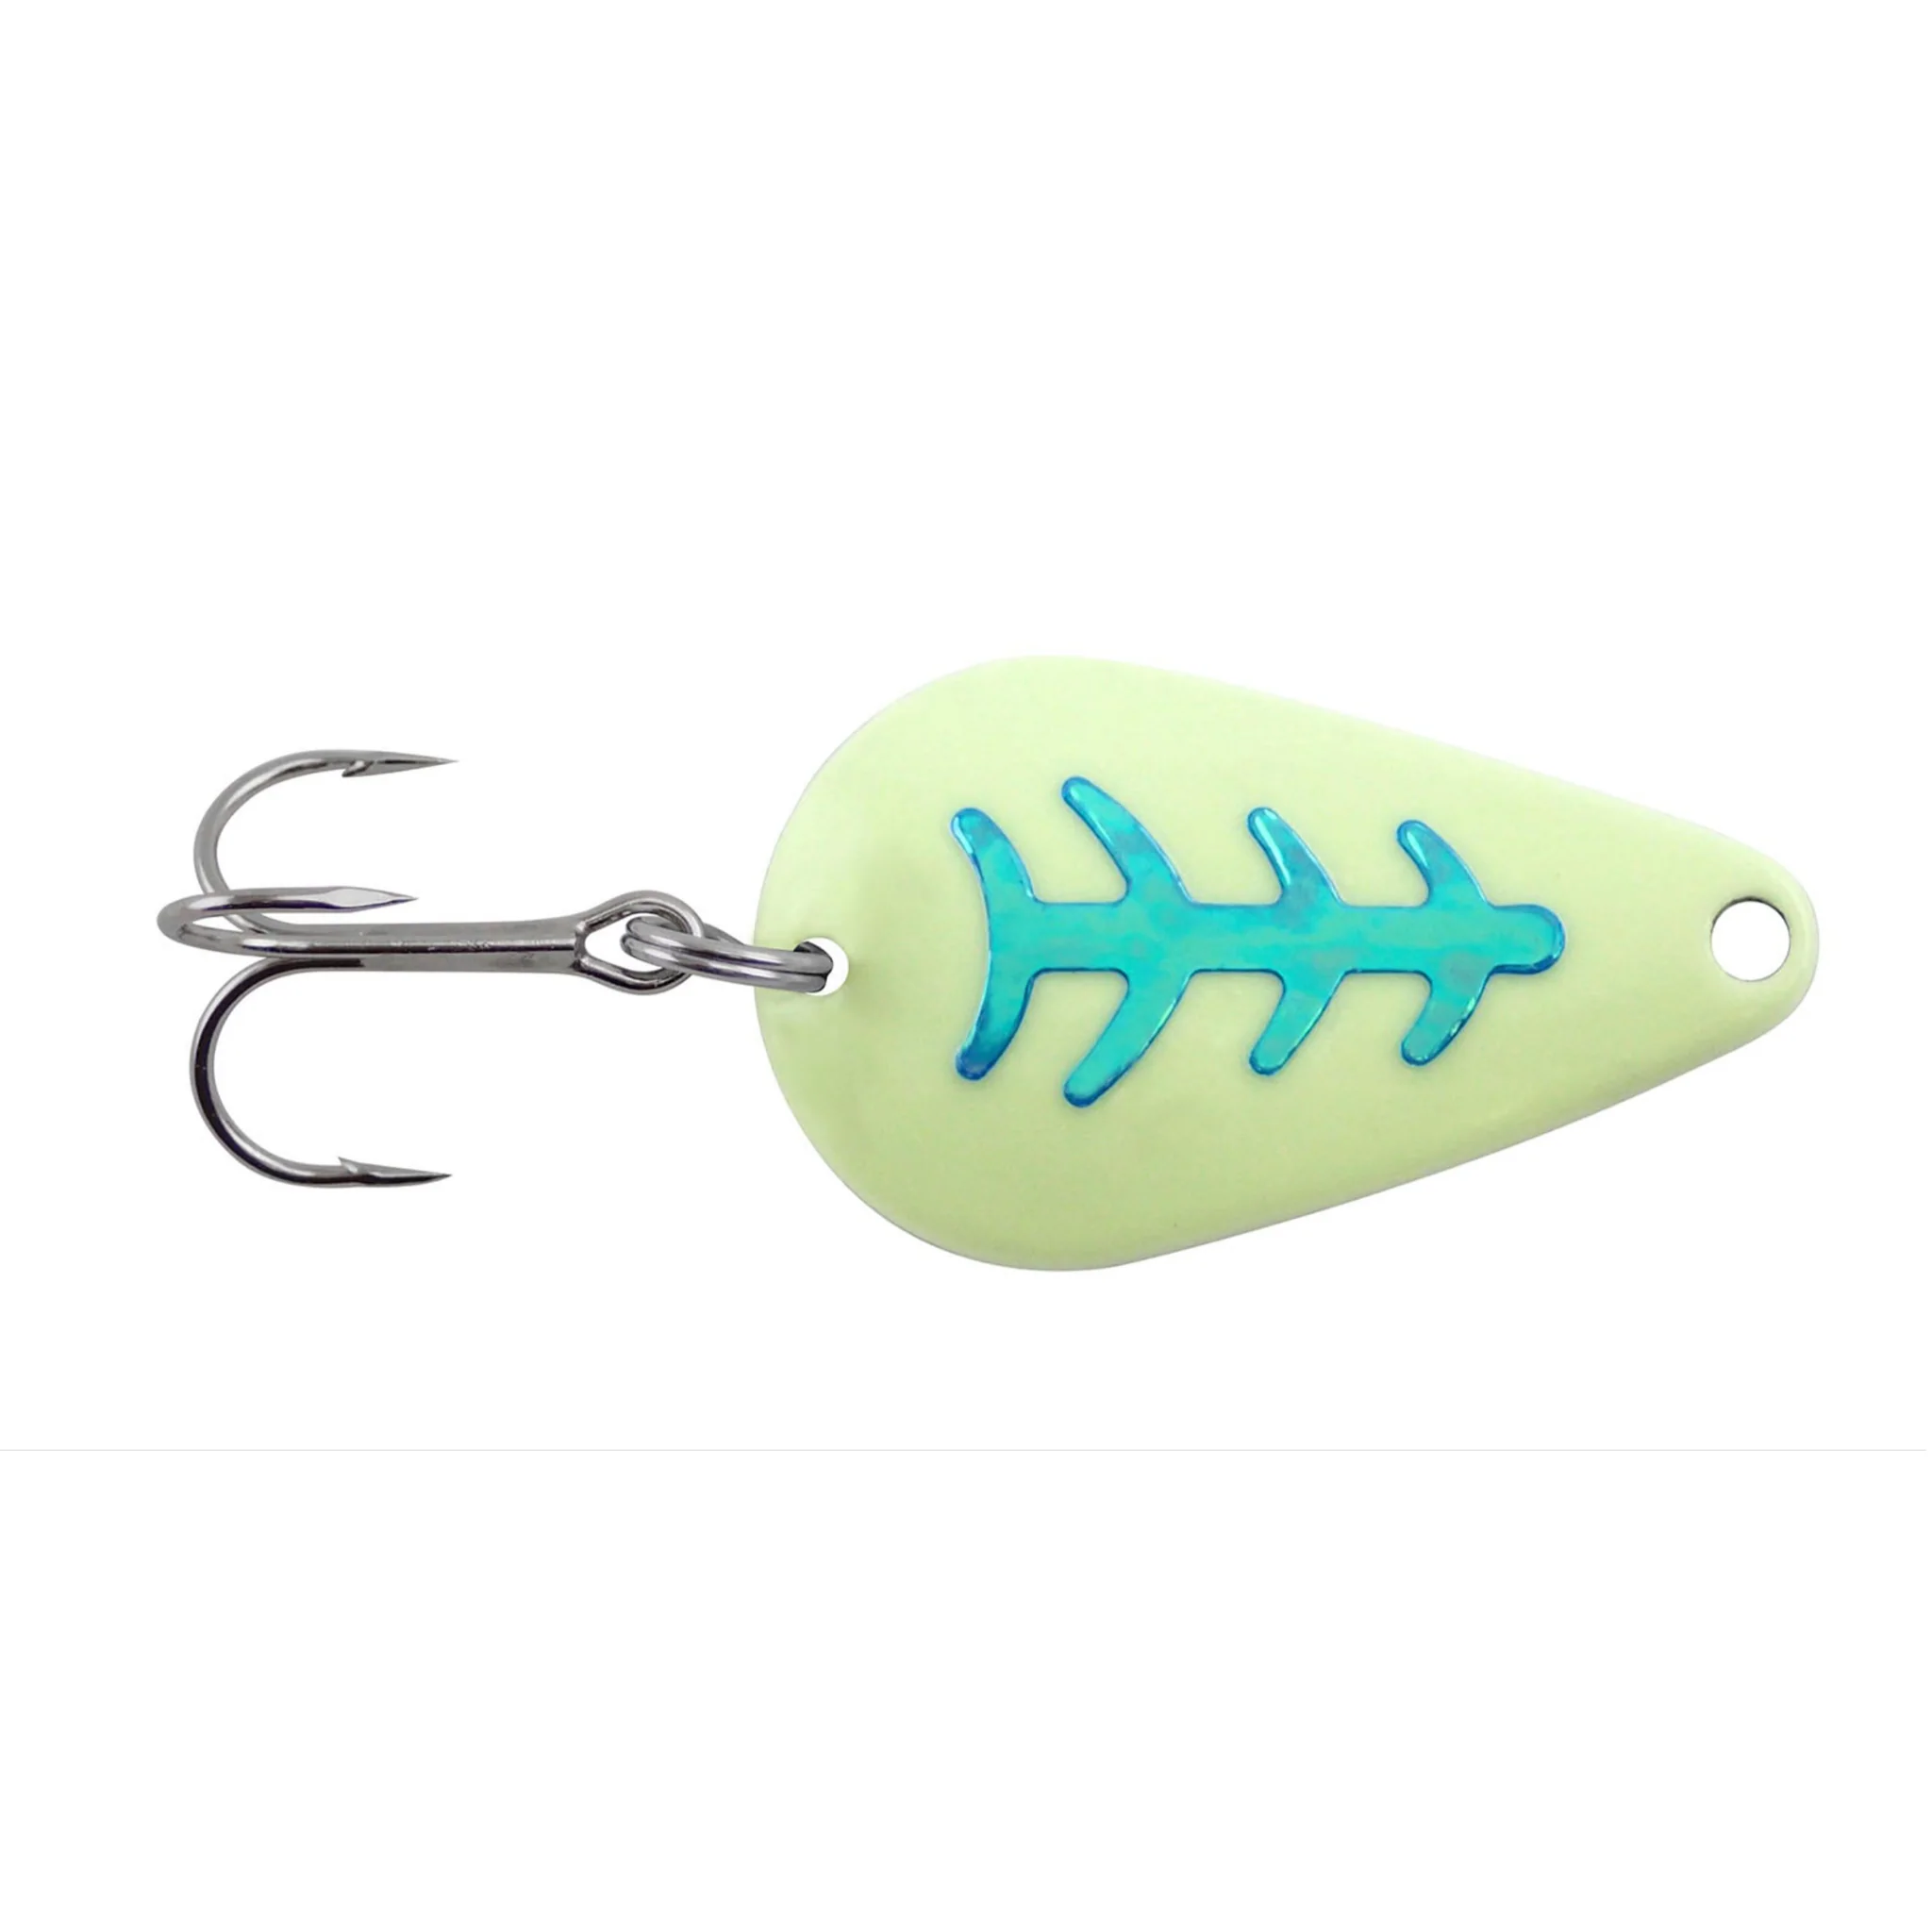 Casting Spoon  Trombly's Tackle Box